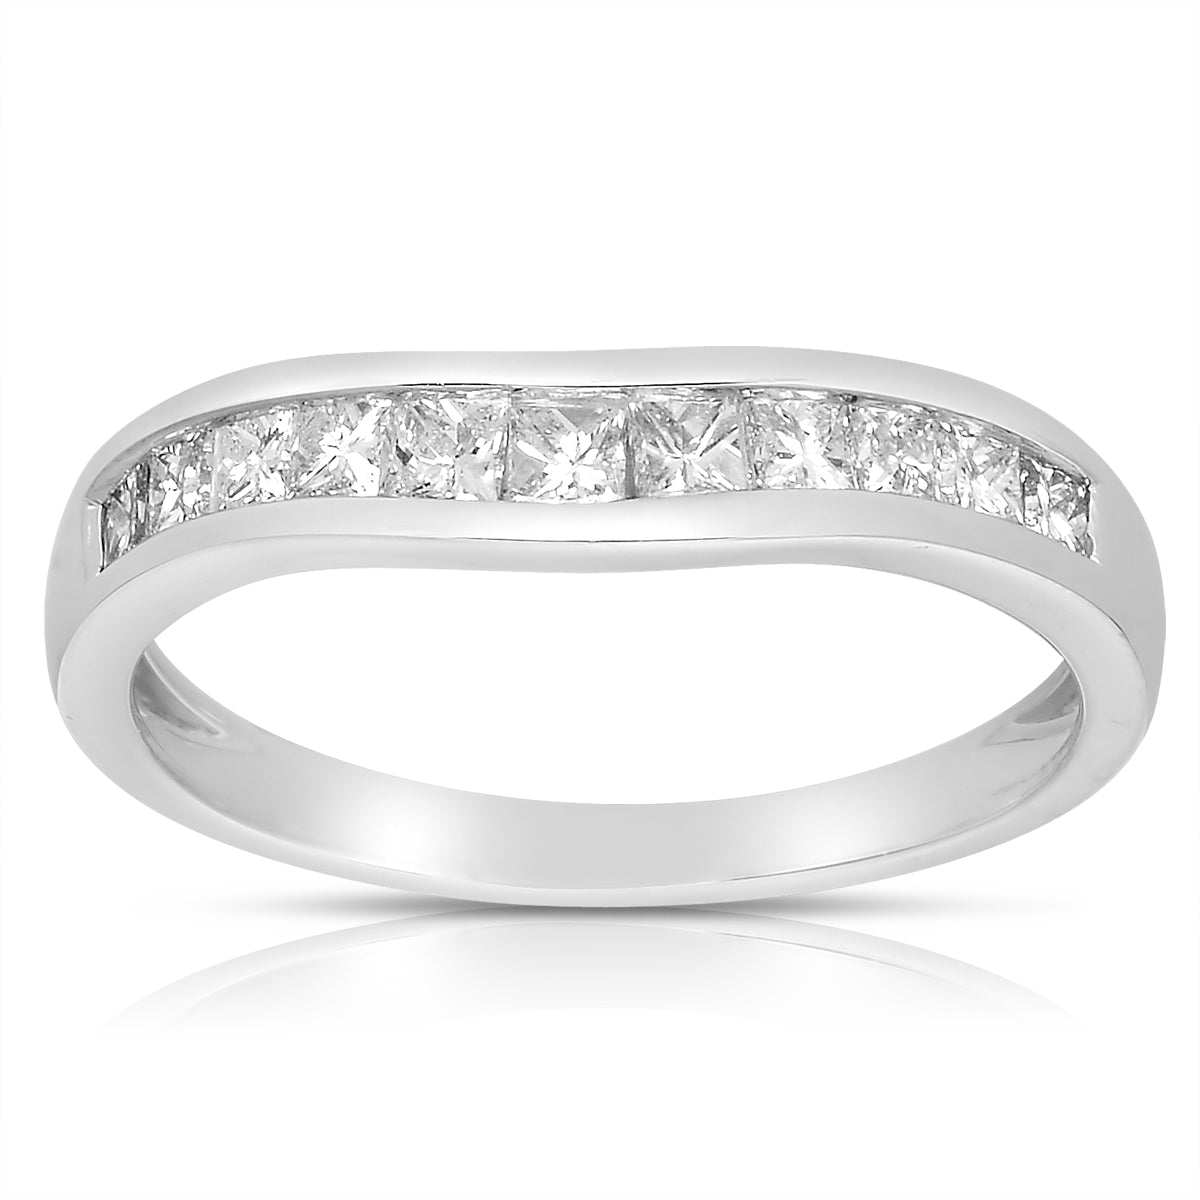 Curved Channel Set Band with Princess Cut Diamonds